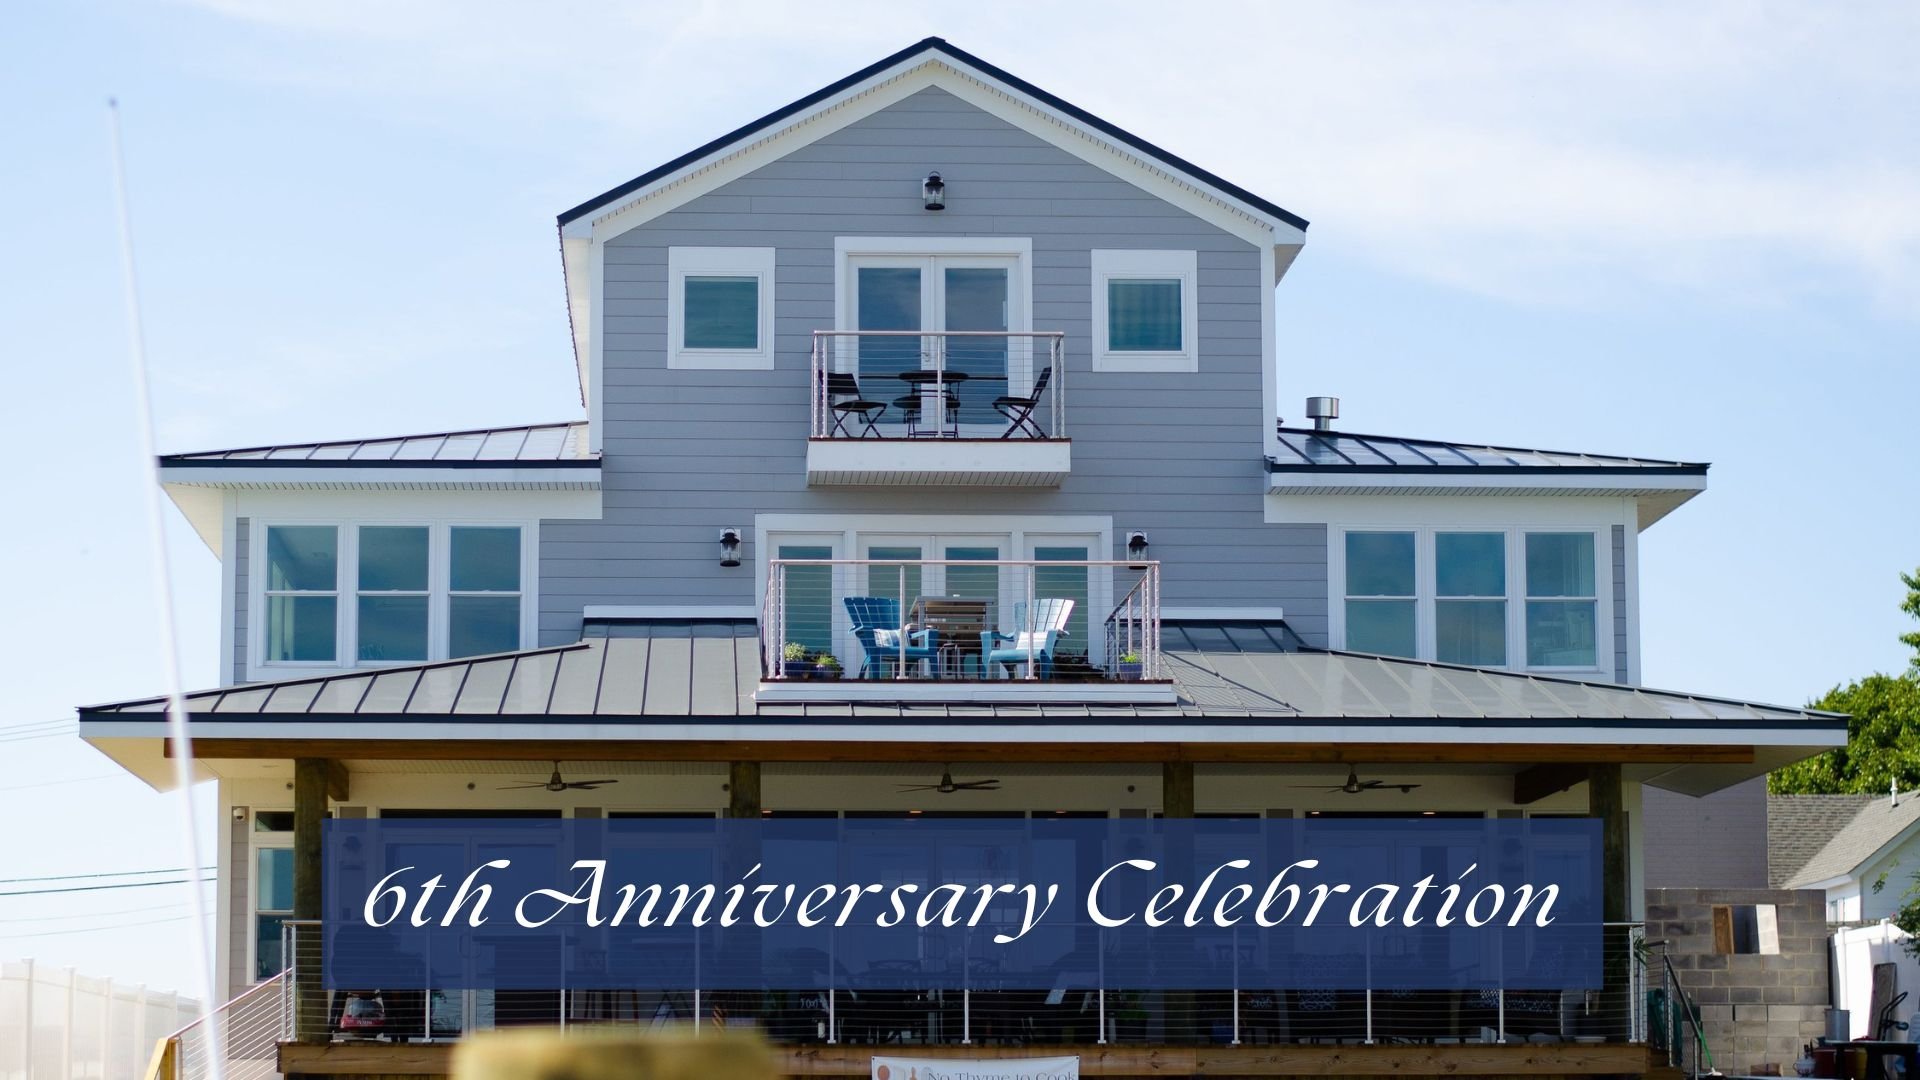 We're celebrating our 6th Year Anniversary on Friday, May 17 from 6-9pm and you are invited! Grab a drink, sway to live music, &amp; enjoy delicious nibbles while sharing the space with friends, whether old or new, to ring in another amazing year her